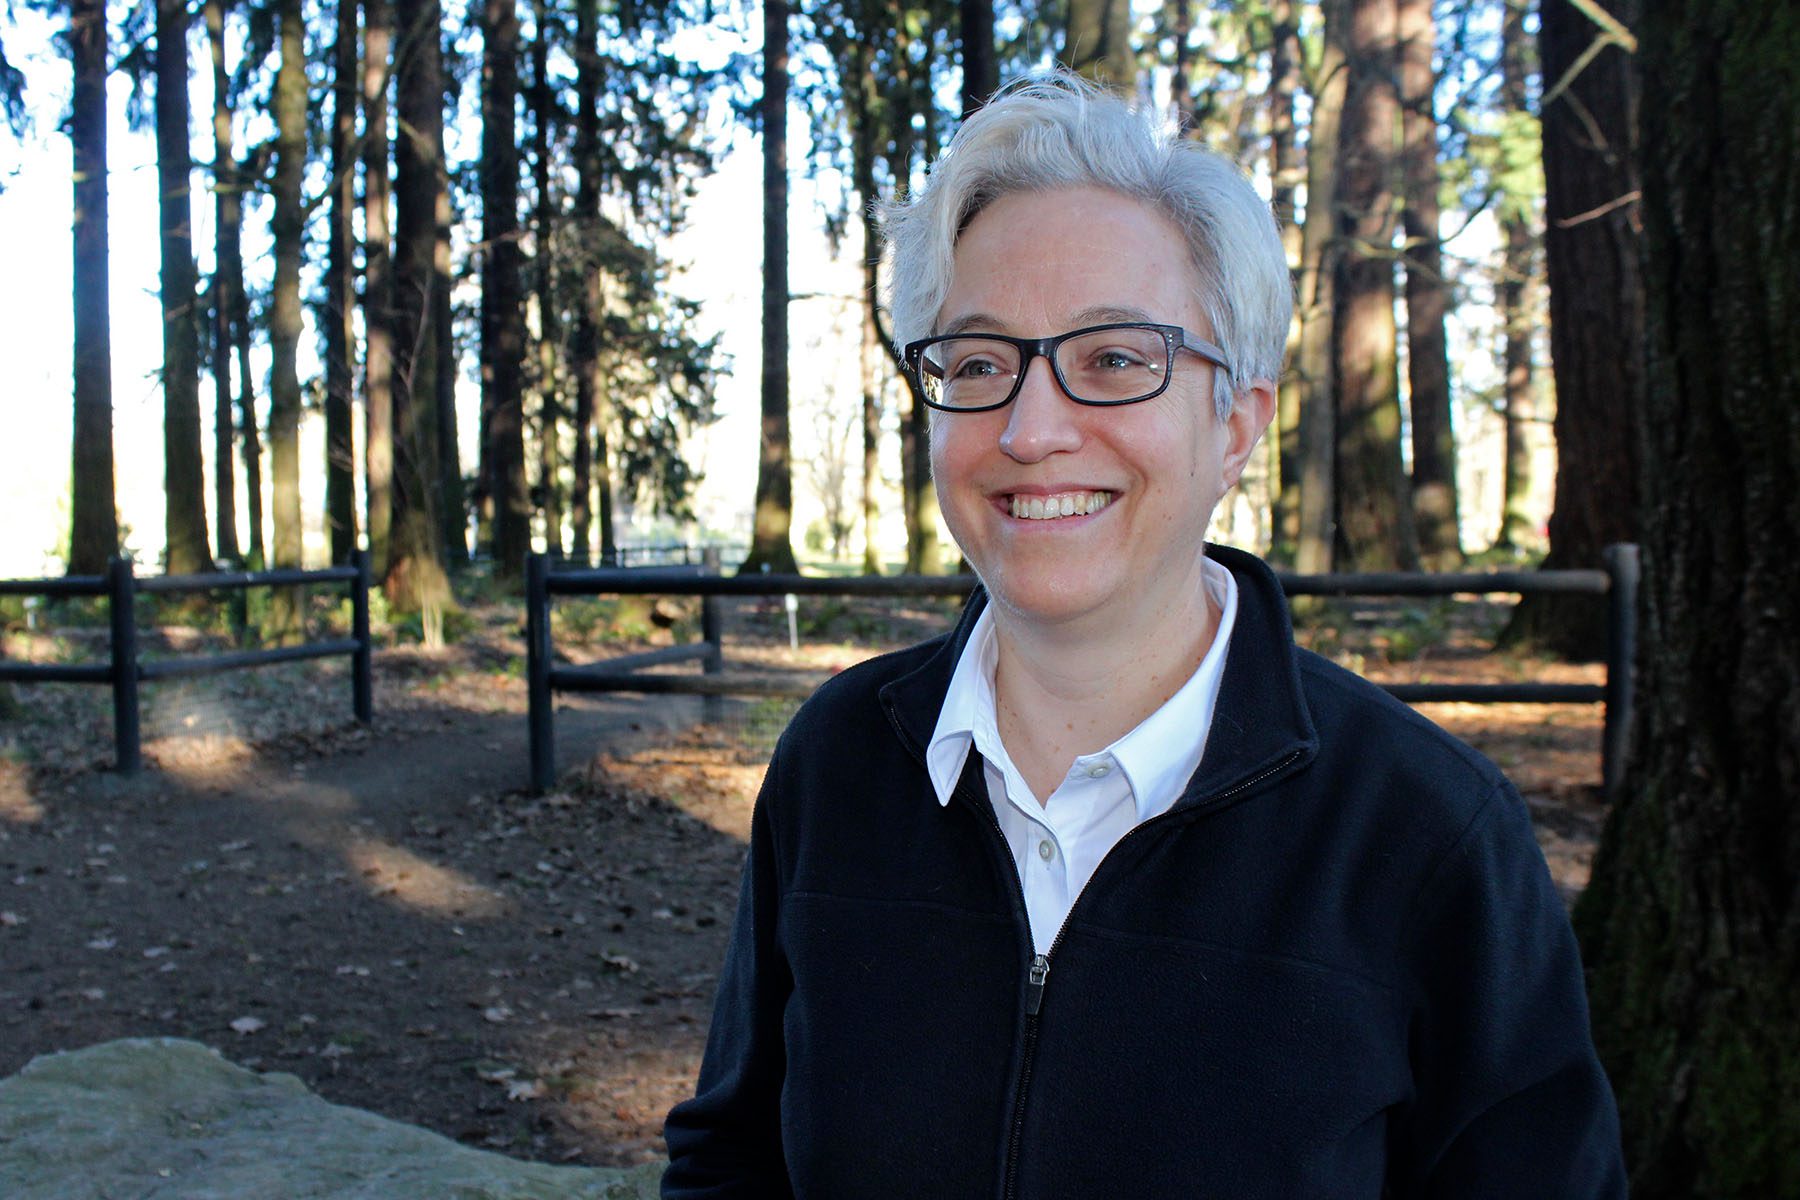 Tina Kotek poses for a picture at a park in Portland, Oregon.